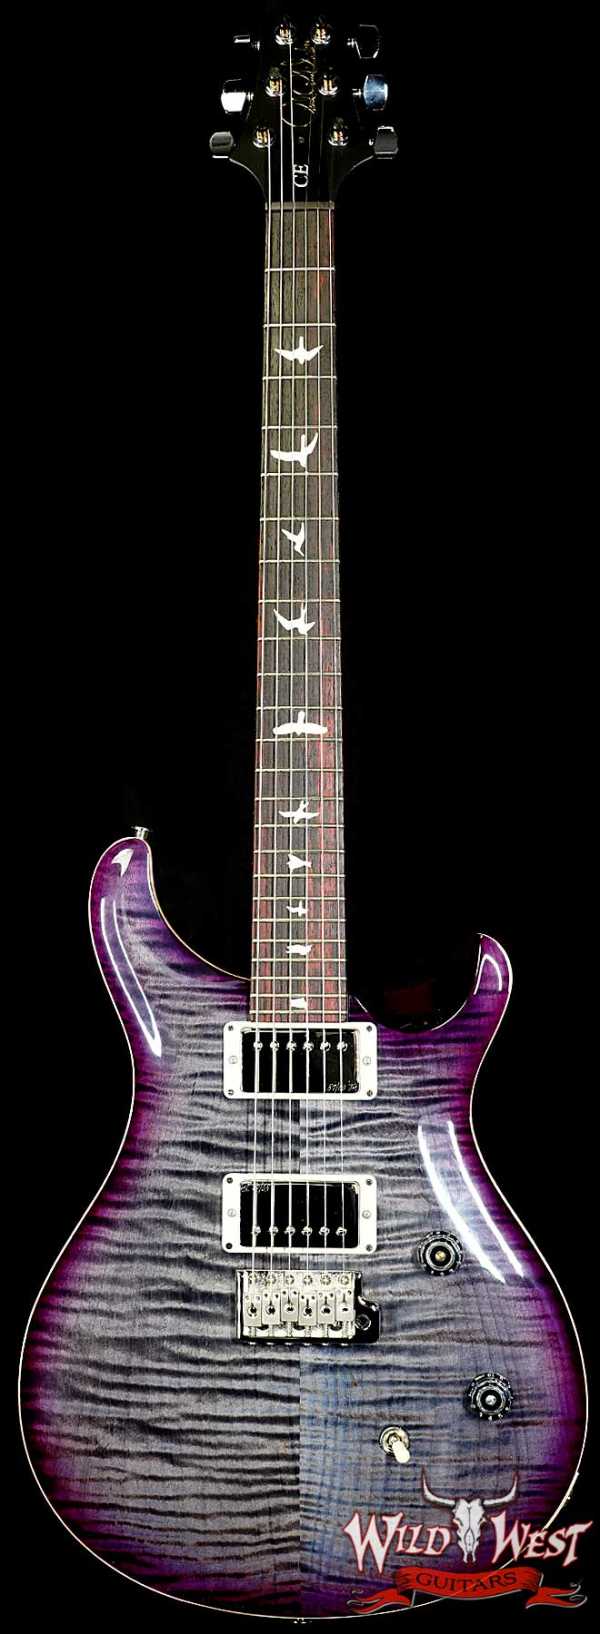 Paul Reed Smith PRS Wild West Guitars Special Run CE 24 Painted Black Neck 57/08 Covered Pickups Faded Grey Black Purple Burst 8.20 LBS